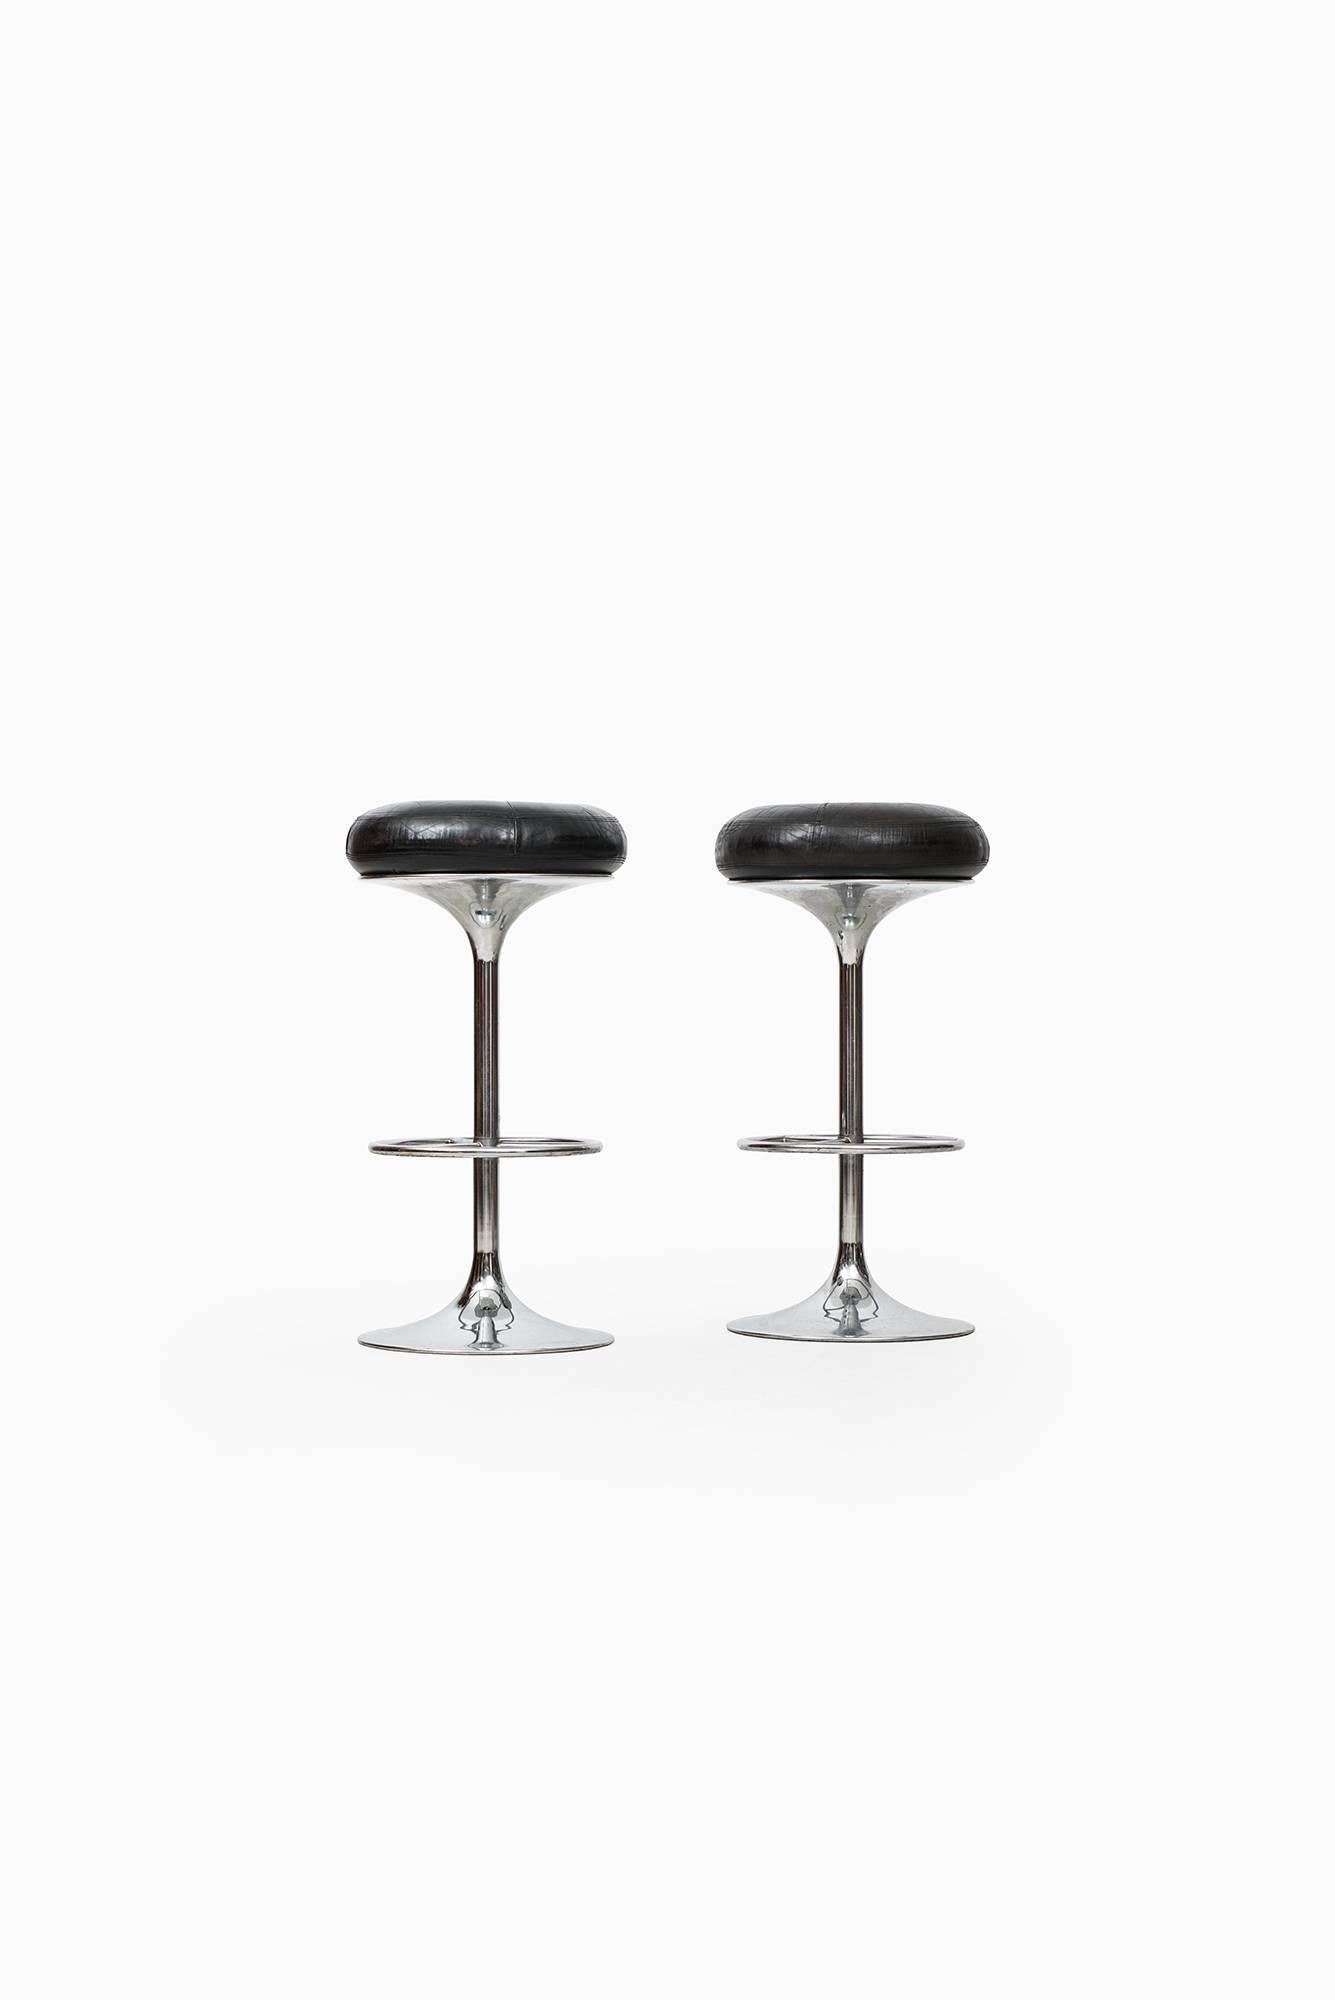 Large set of six bar stools model Classic designed by Börge Johansson. Produced by Johansson design in Markaryd, Sweden.